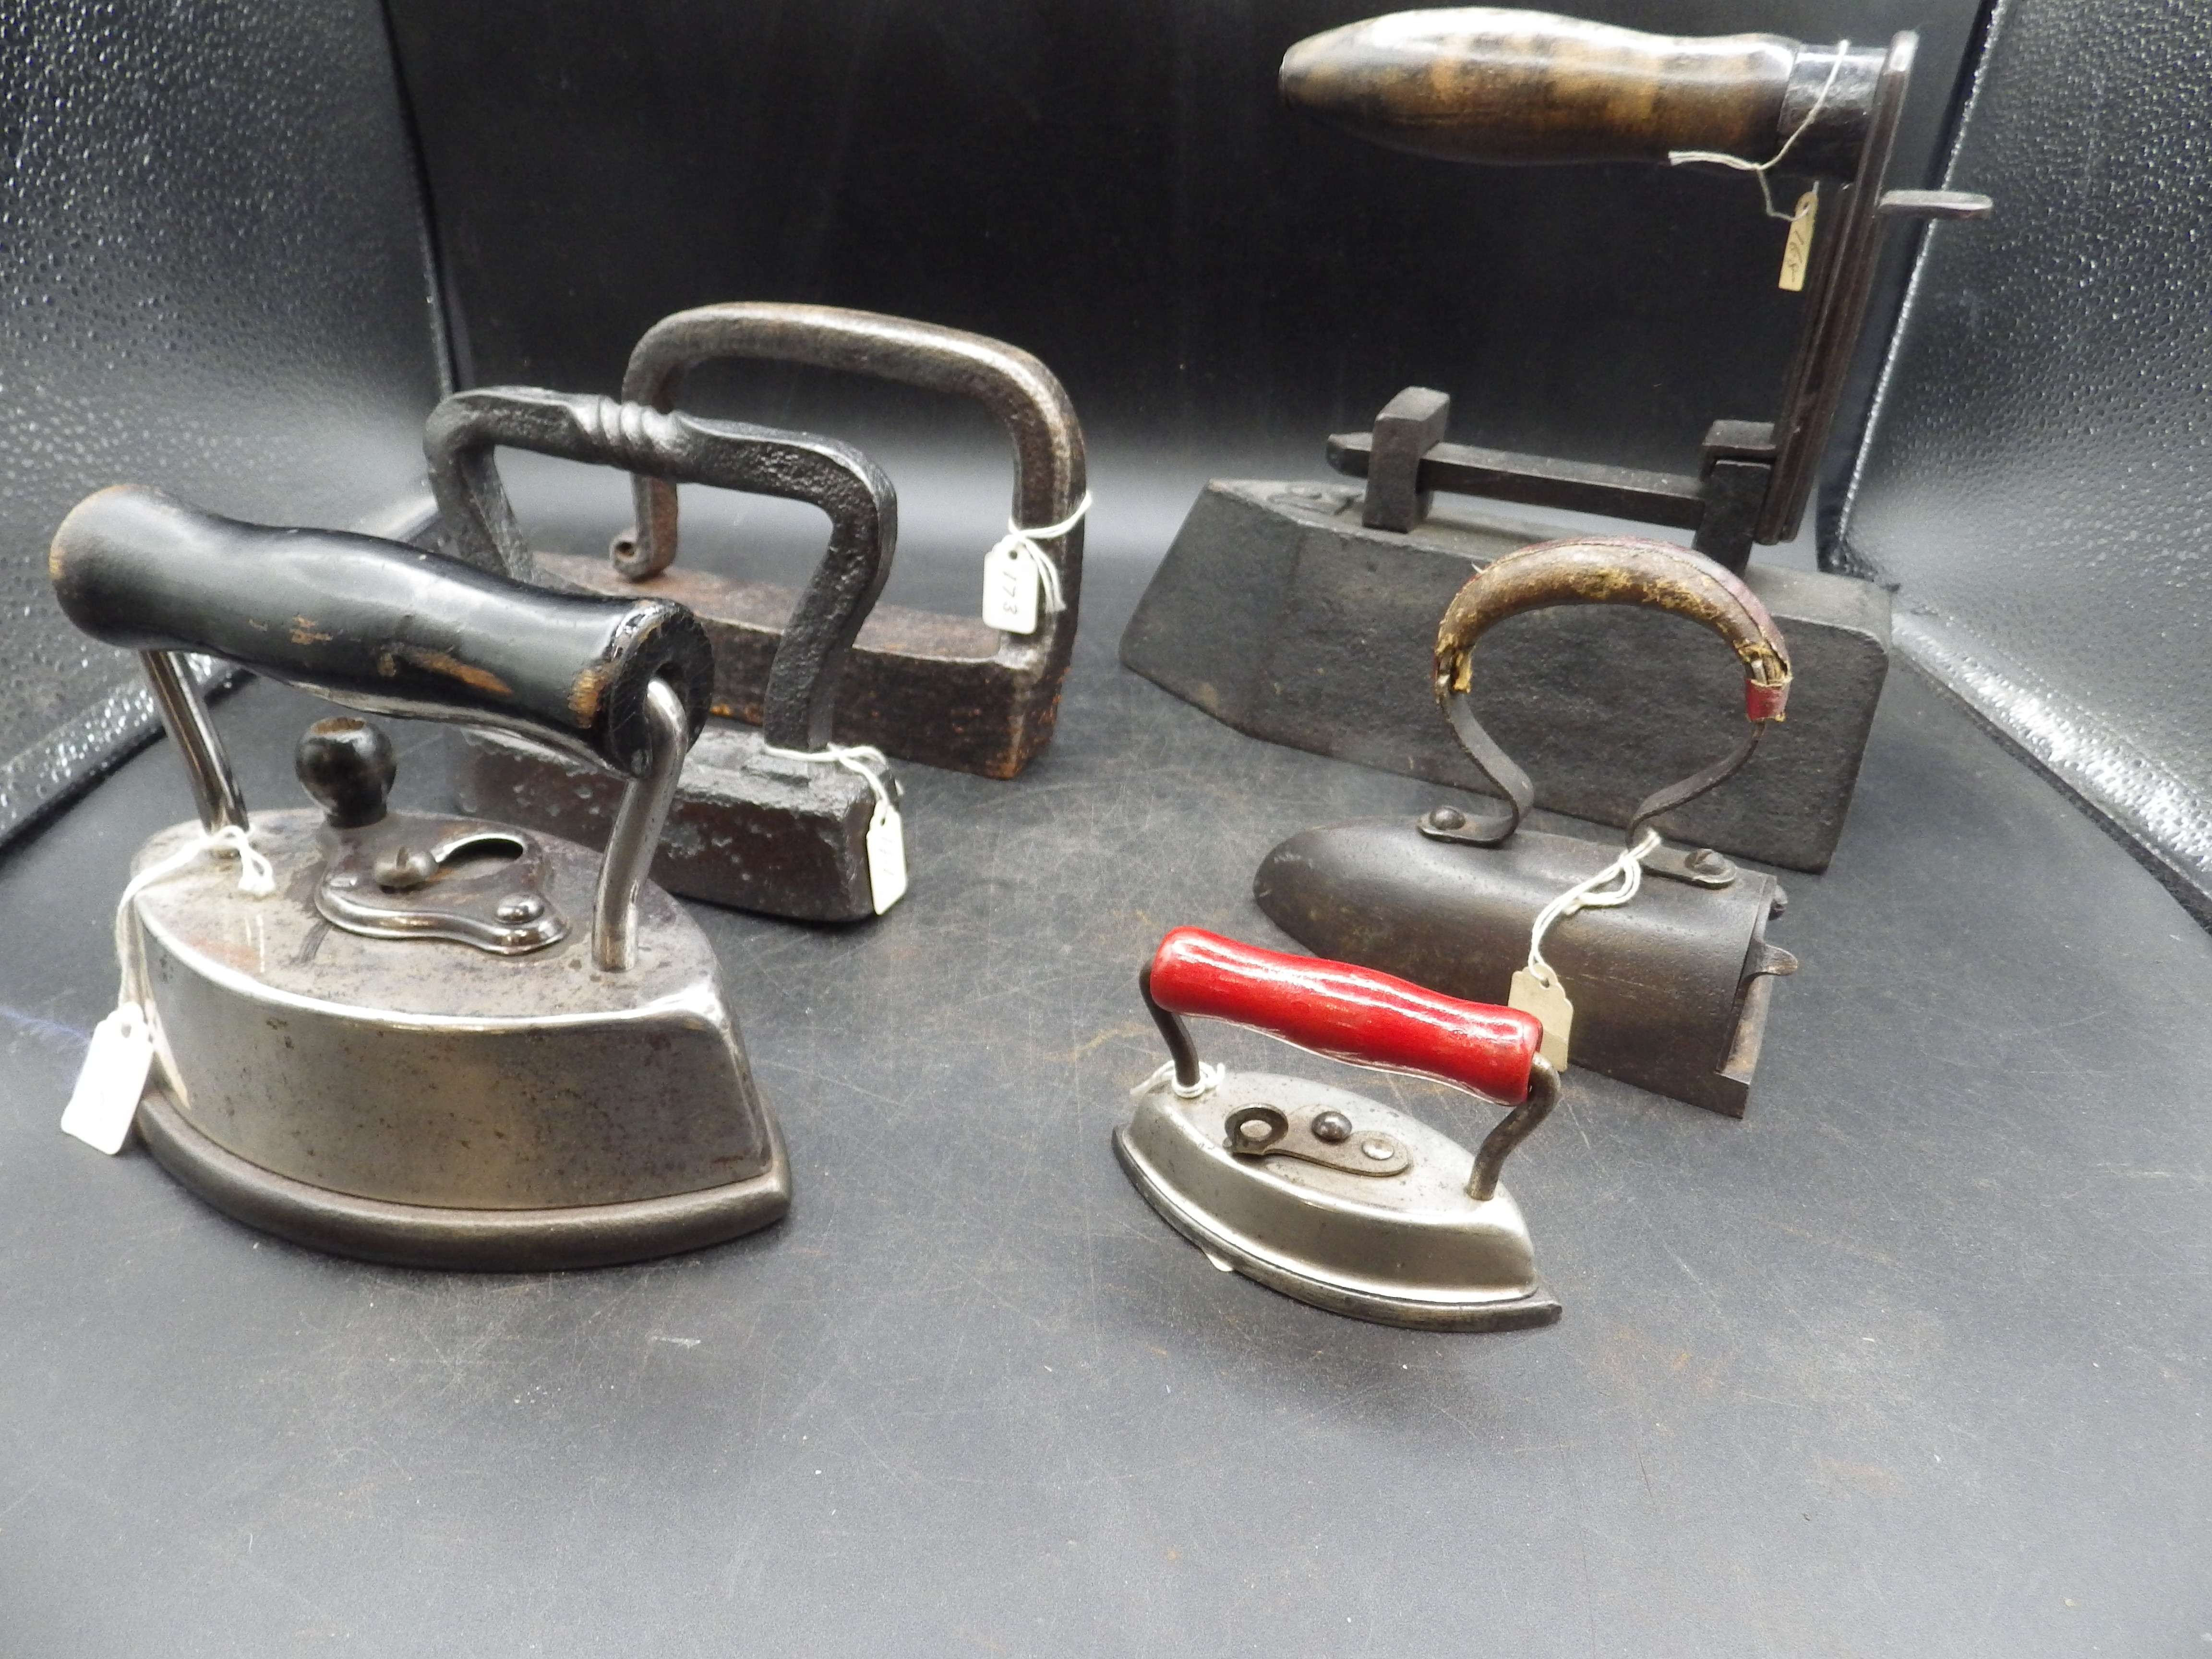 6 assorted irons to include tailor goose irons incl one old hand forged iron, box iron with slug and - Image 2 of 2